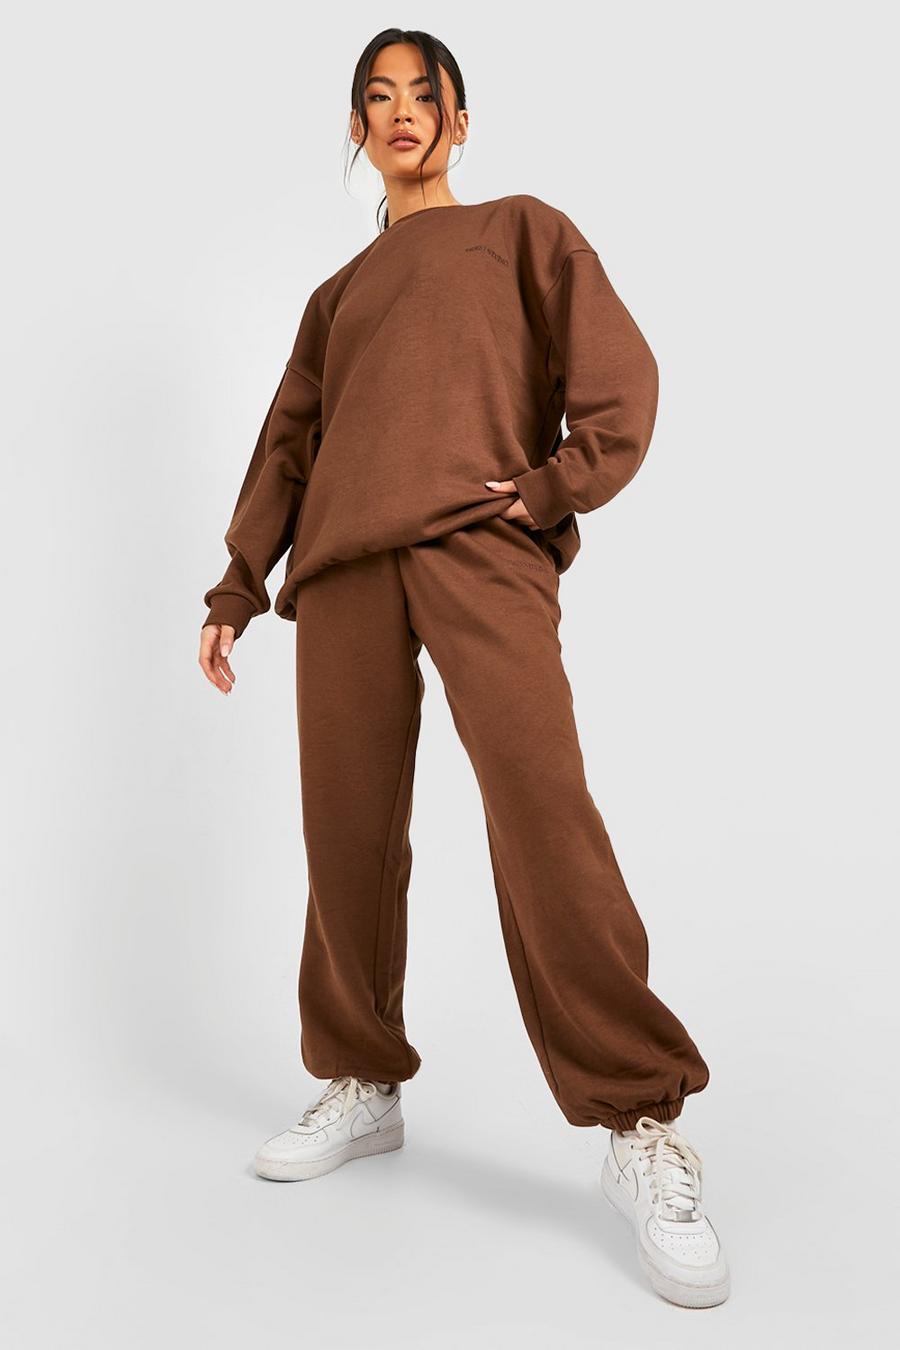 Chocolate marrón Slogan Embroidered Oversized Sweater Tracksuit